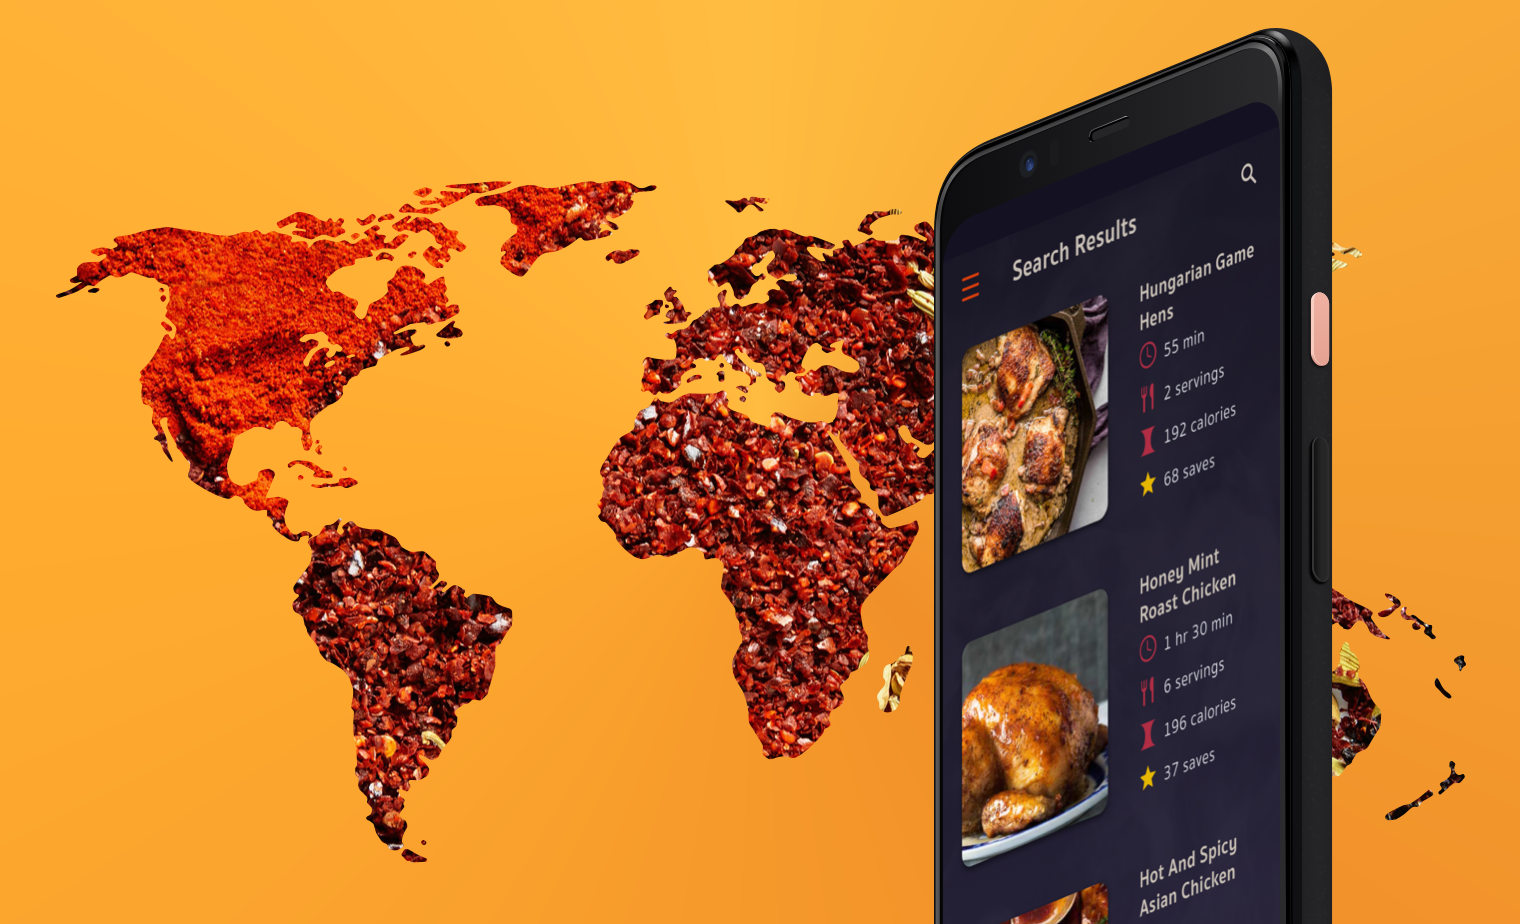 search results for chicken over orange background and world map of food